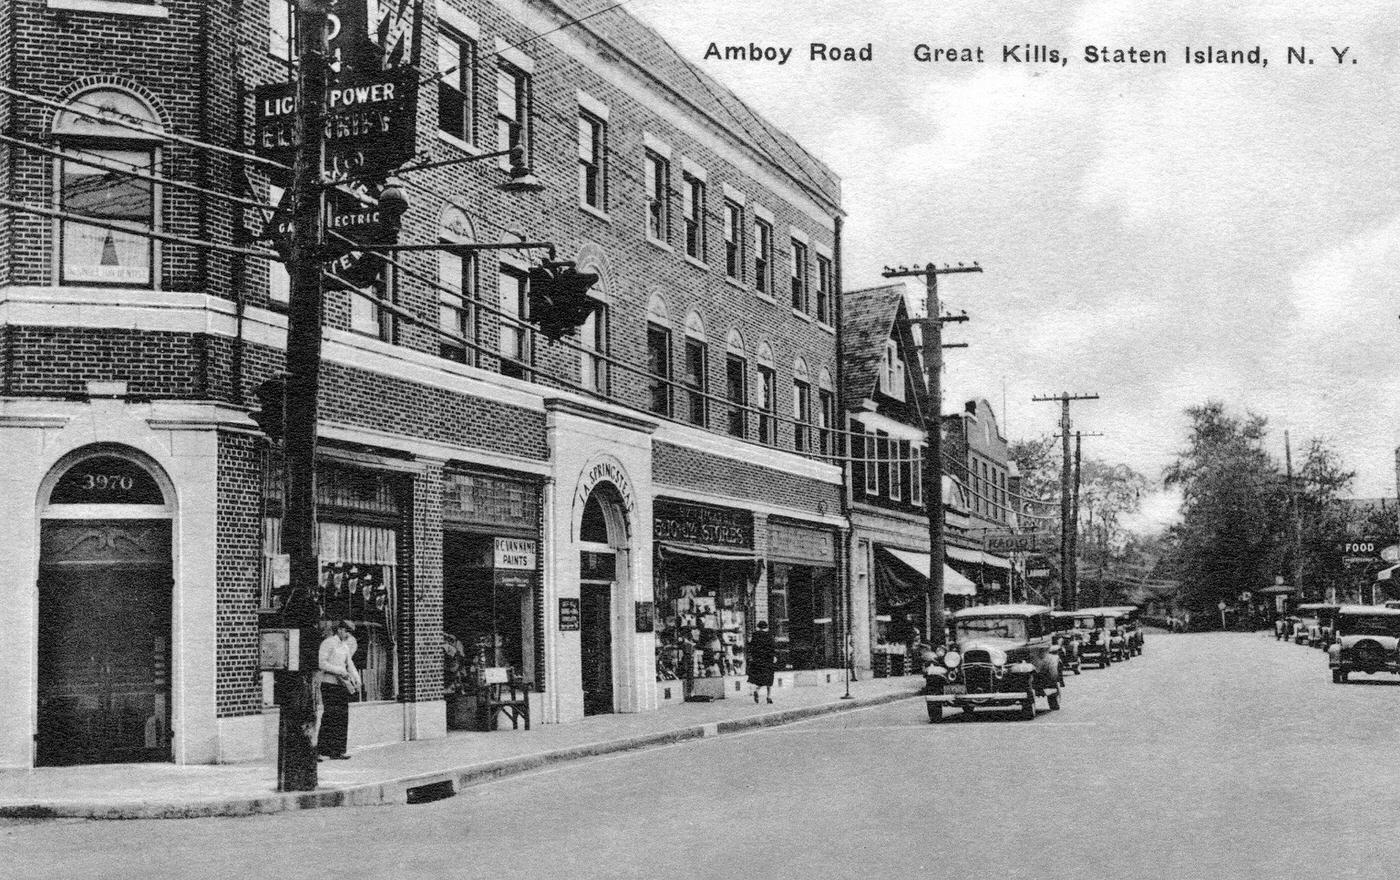 Amboy Road Featuring Early 20Th-Century Cars And Shops With A Sign For 'Light, Power Gas Electric' In Great Kills, Staten Island, 1910.